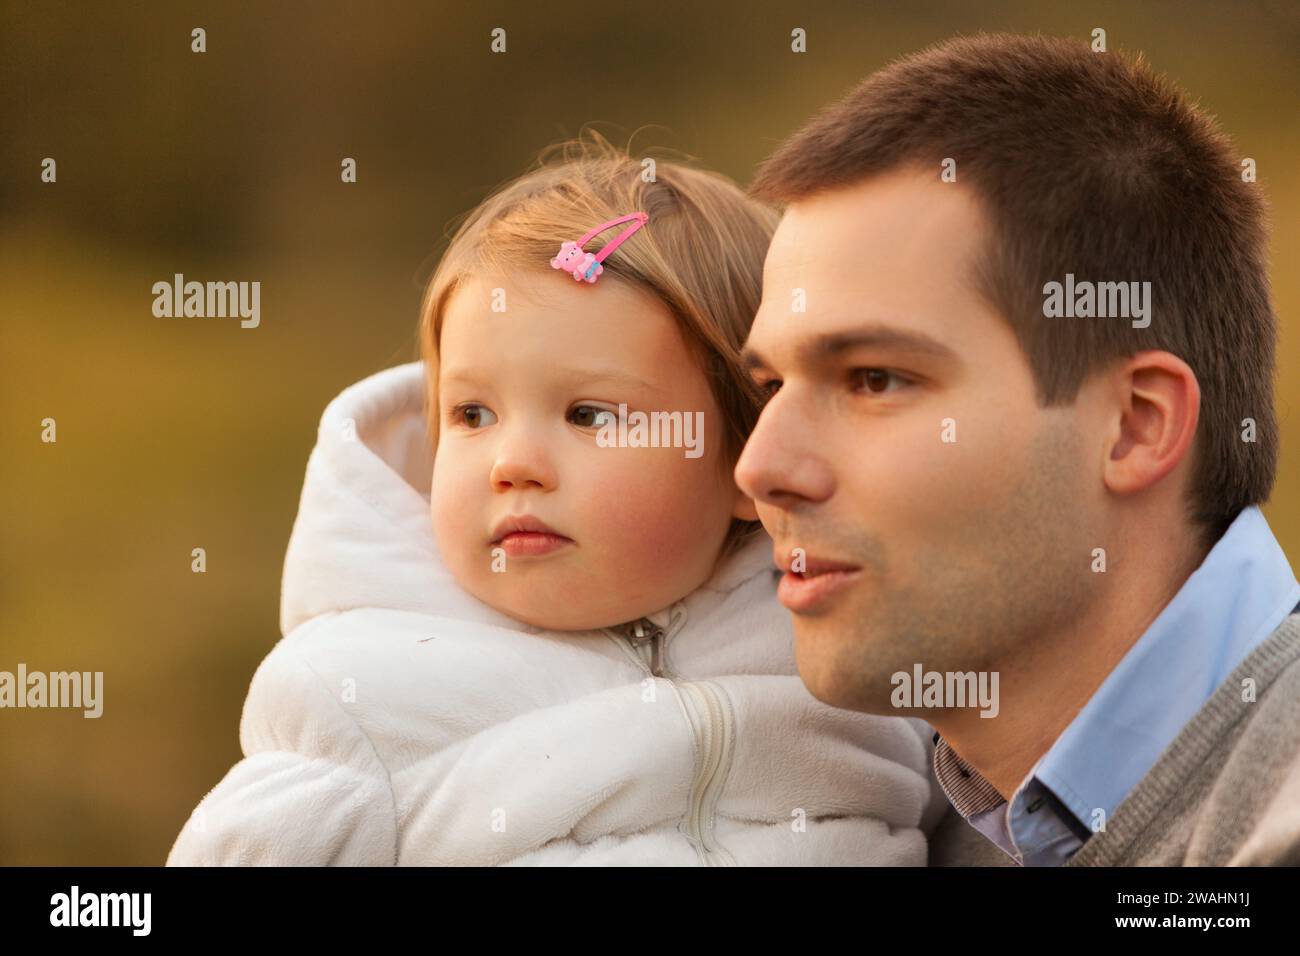 Tender moment captured as father holds young daughter in his arms, their expressions serene against a soft-focus background Stock Photo